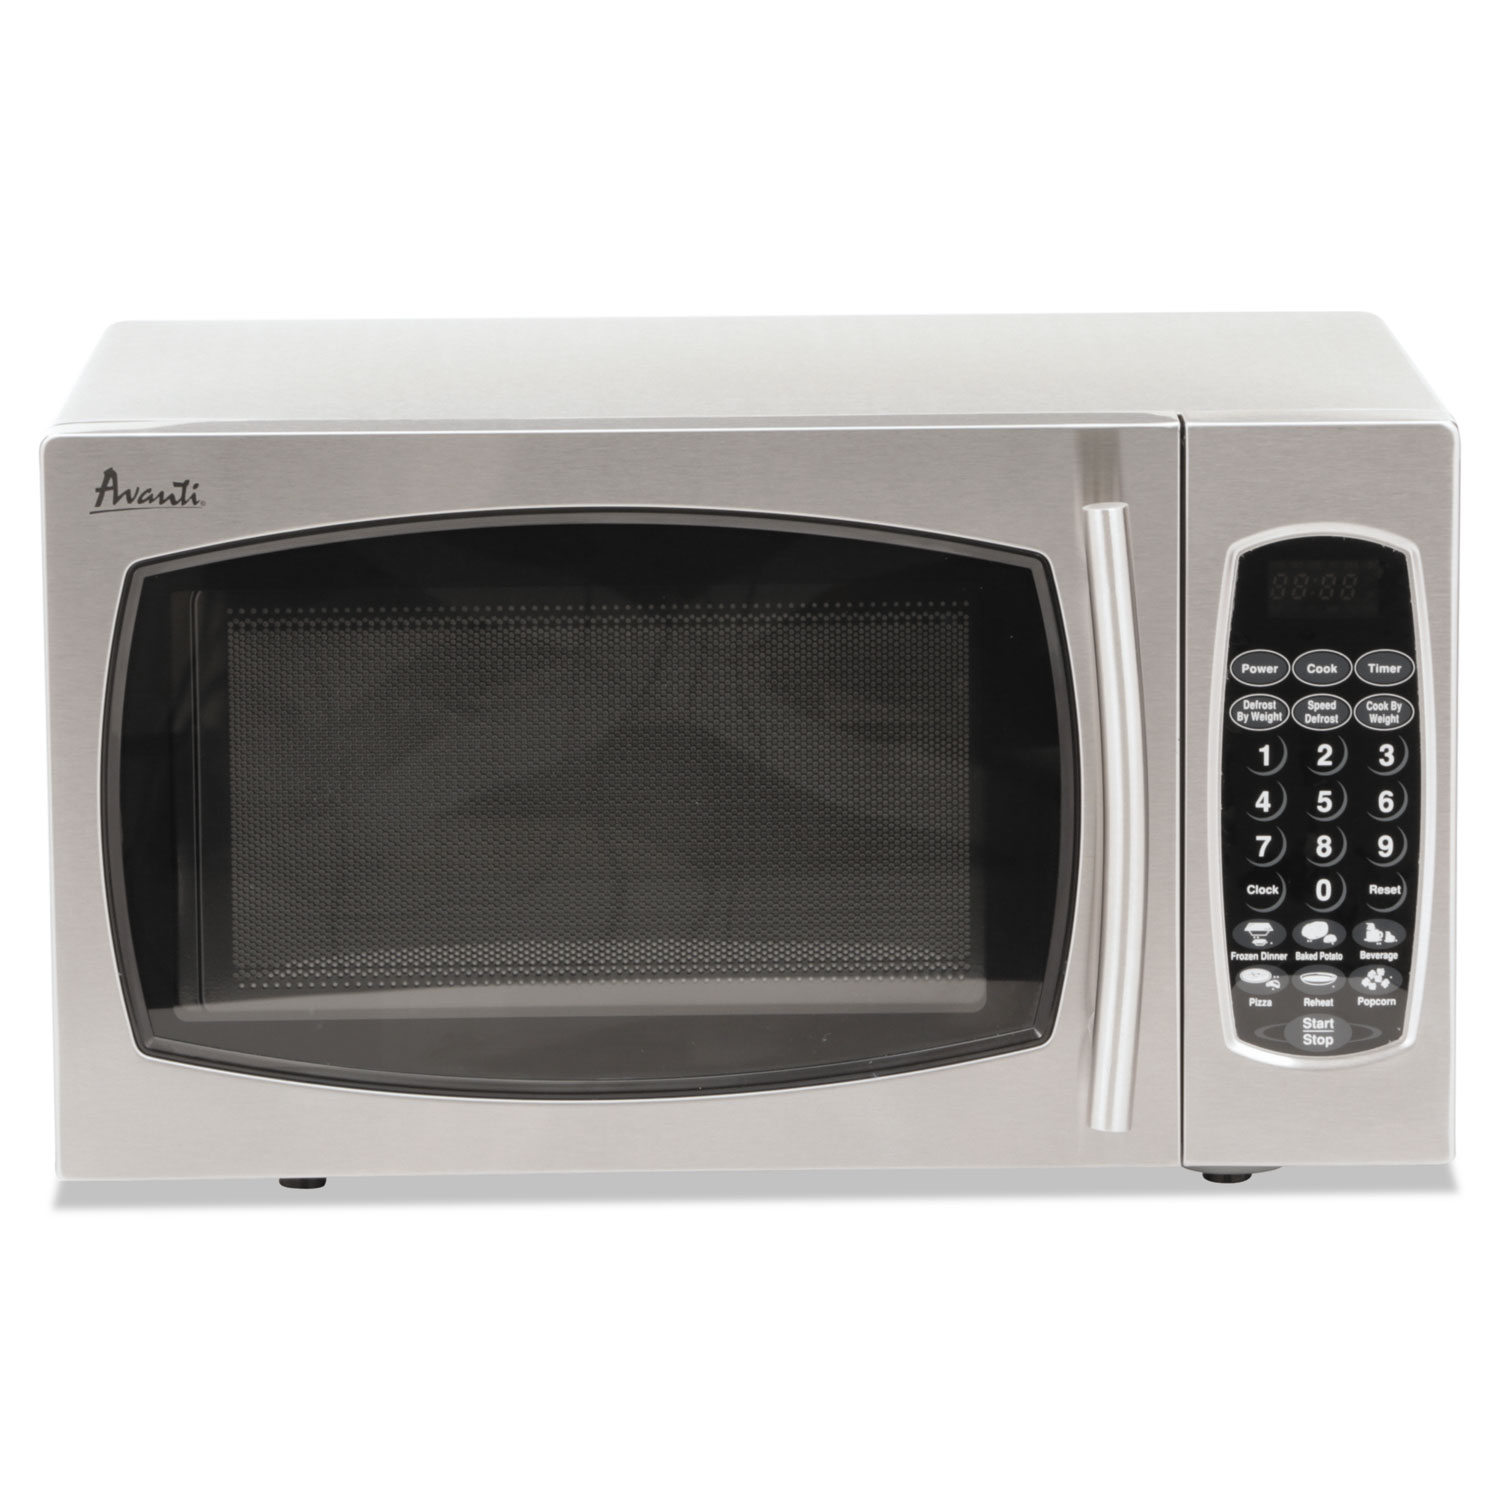 0.9 Cubic Foot Capacity Stainless Steel Microwave Oven, 900 Watts